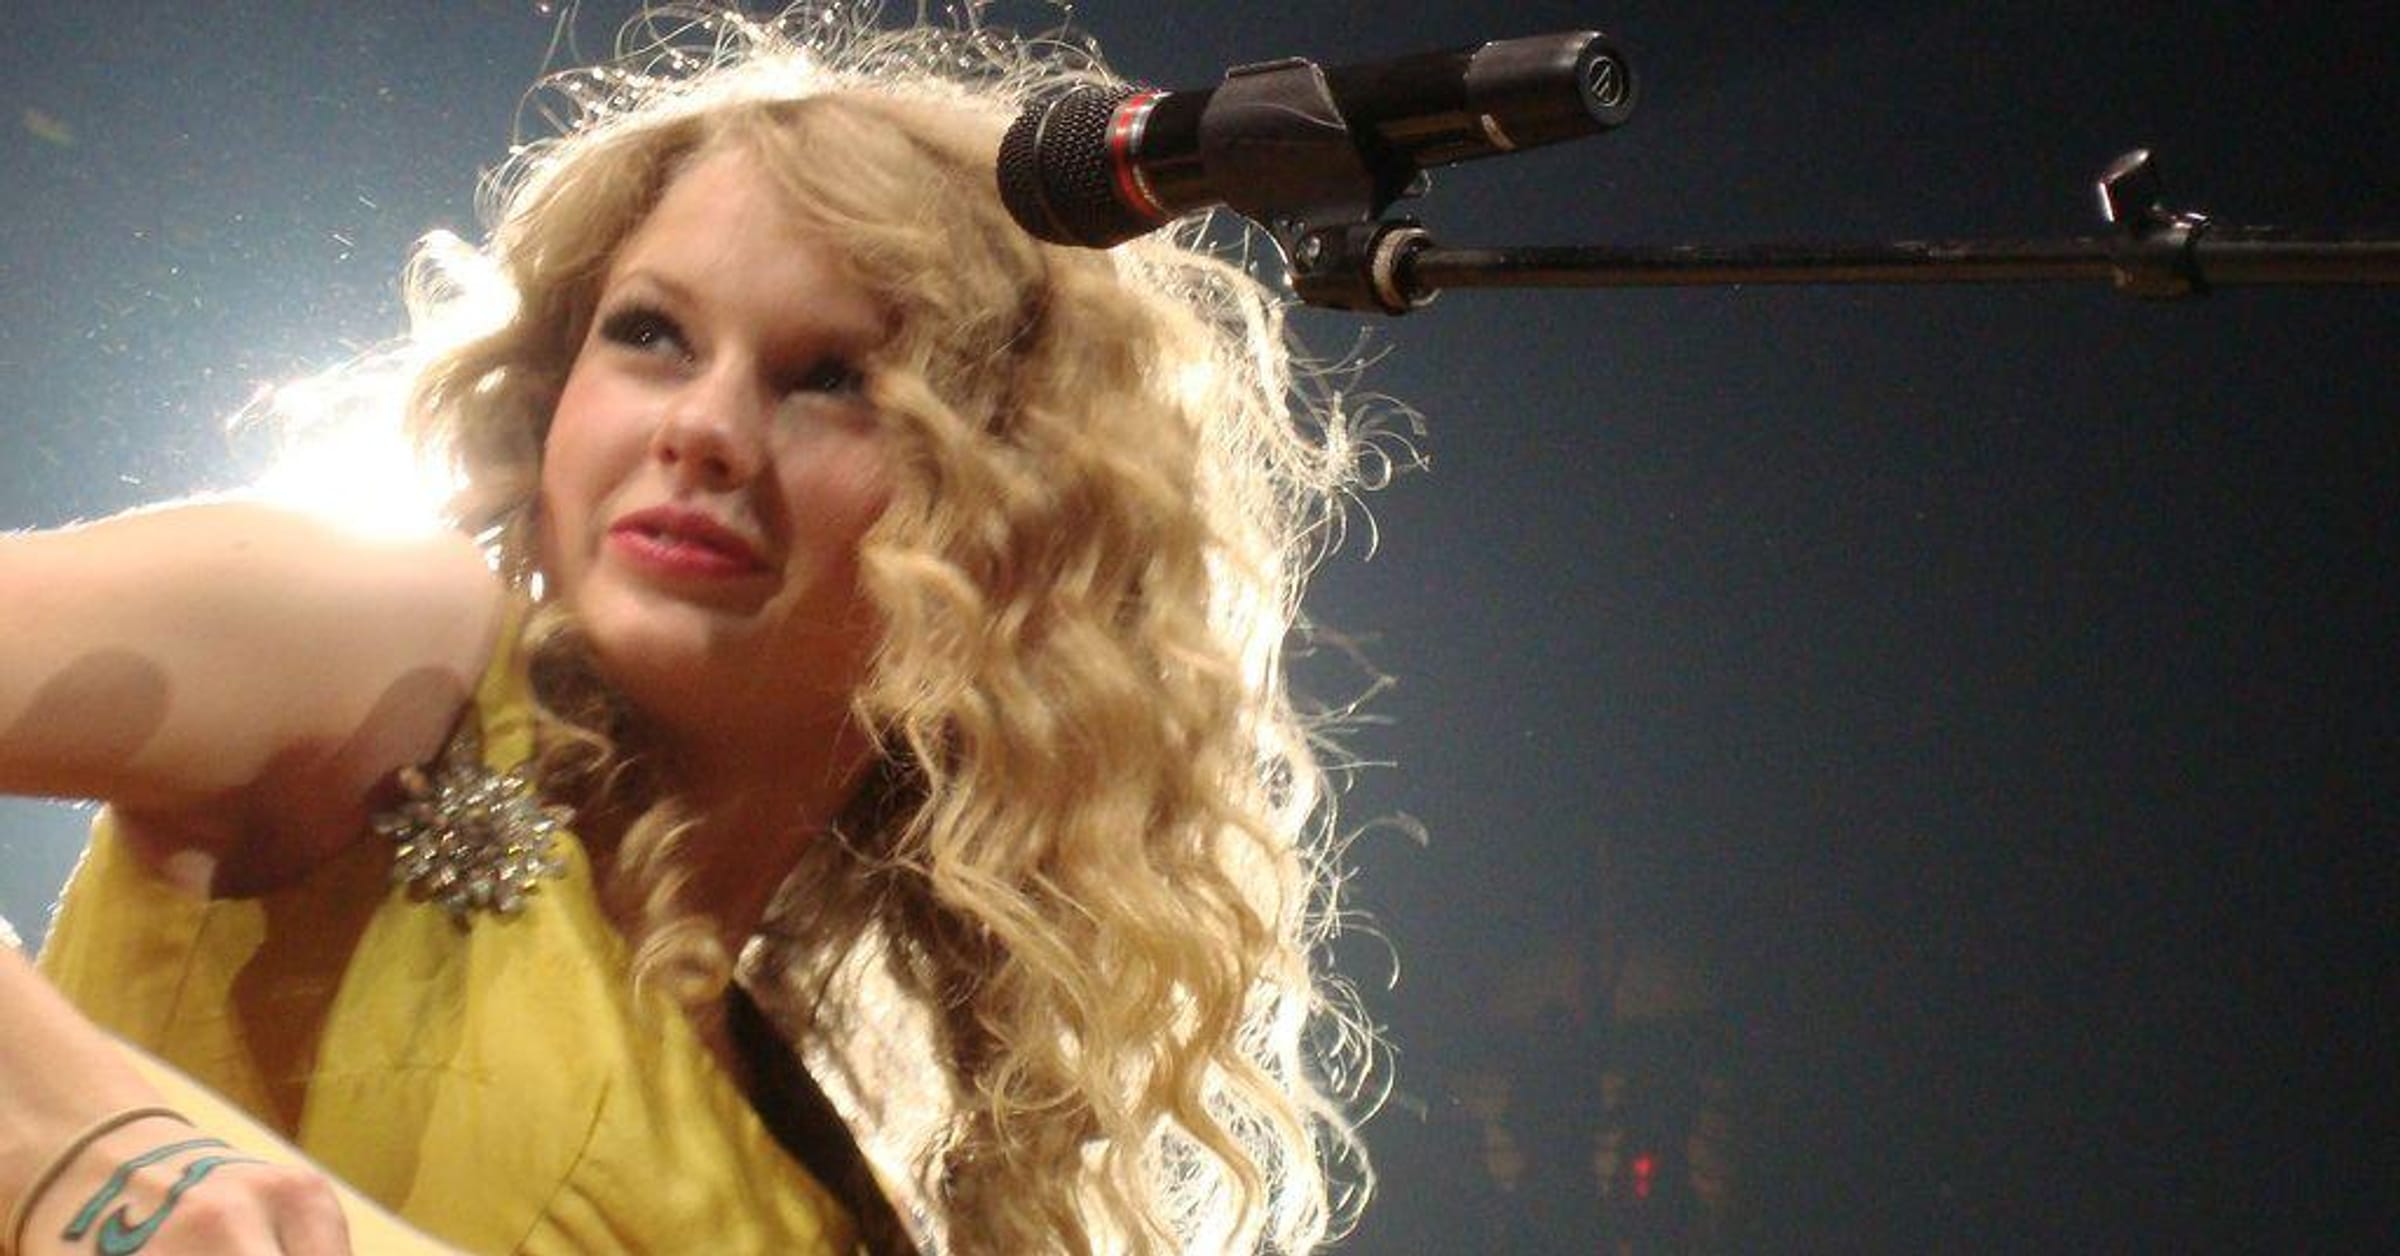 28 Best Taylor Swift Friendship Quotes From Song Lyrics